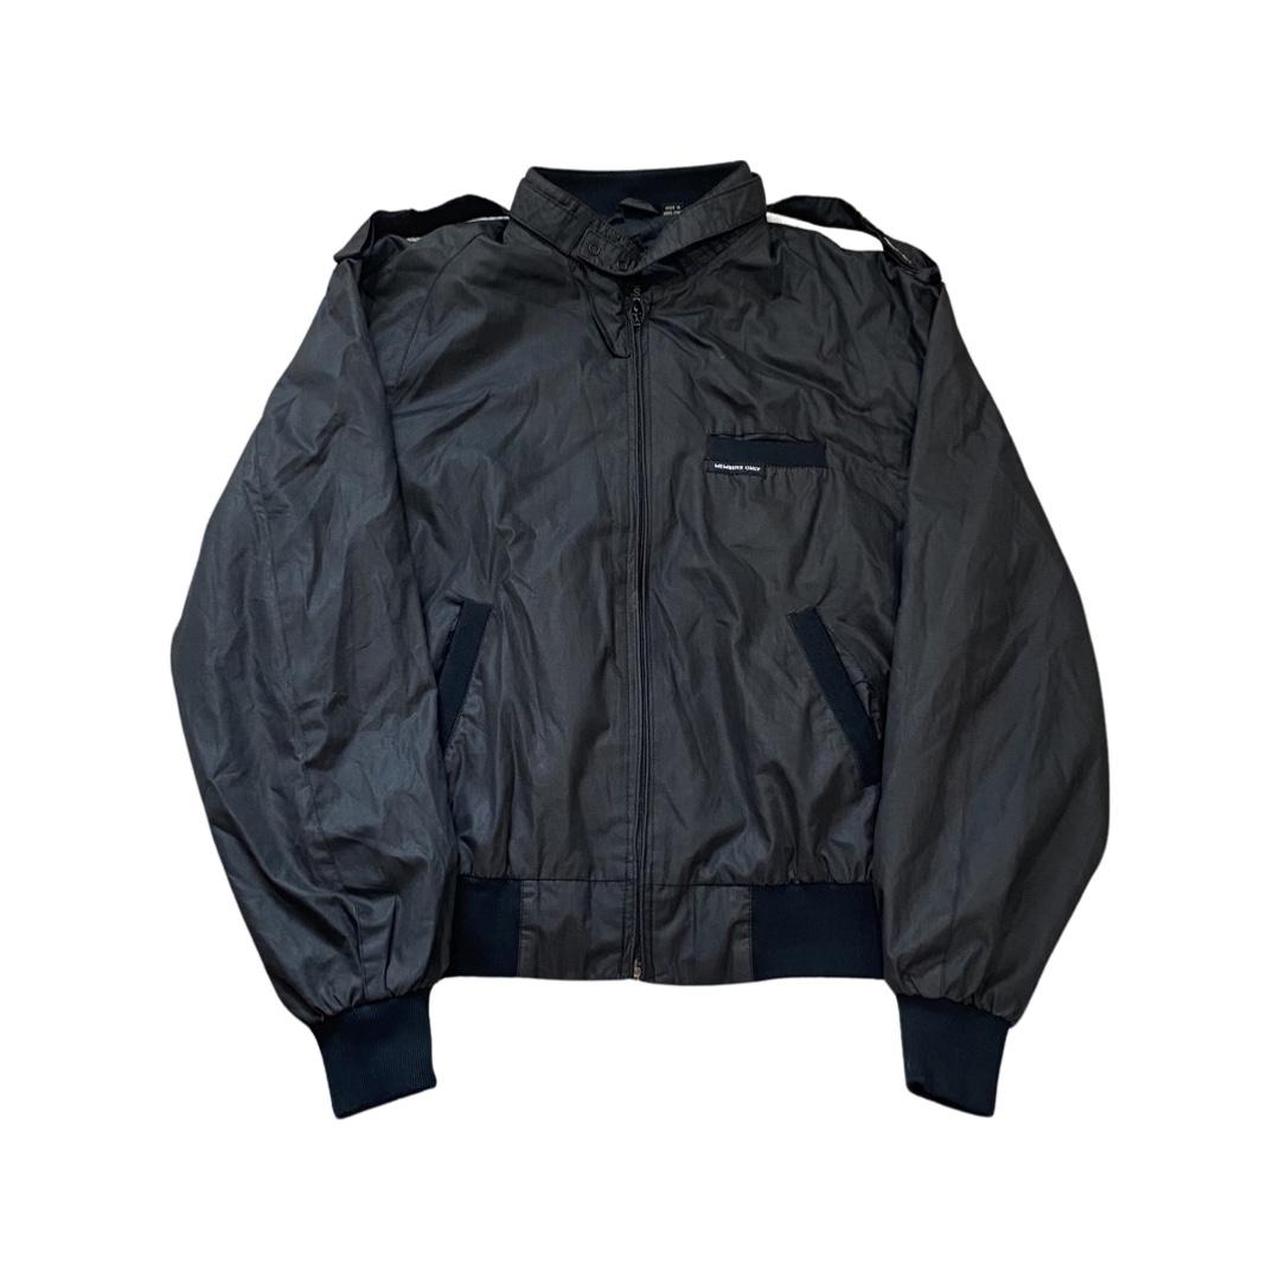 Product Image 1 - VINTAGE MEMBERS ONLY RACER JACKET

-80s
-MADE